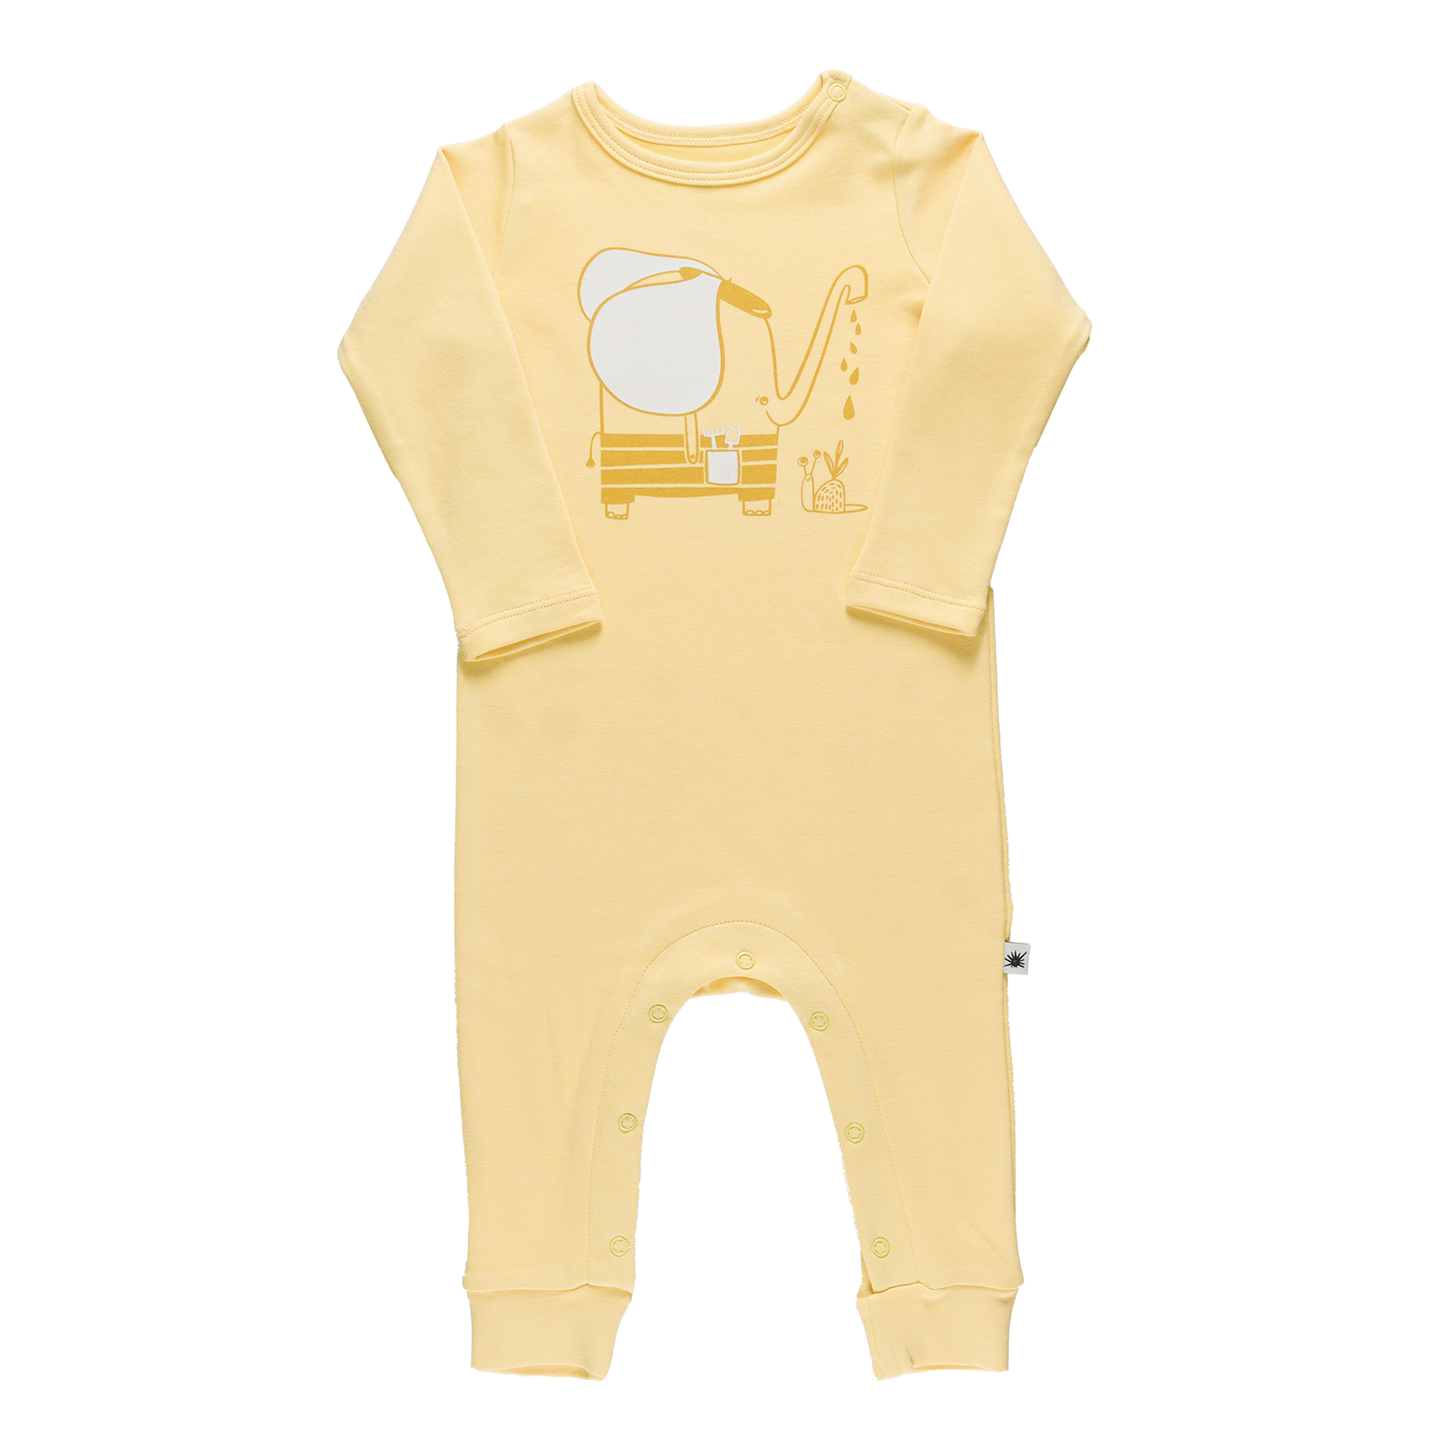 Organic Play Jumpsuit -Aged 3m to 18m- Colored Yellow